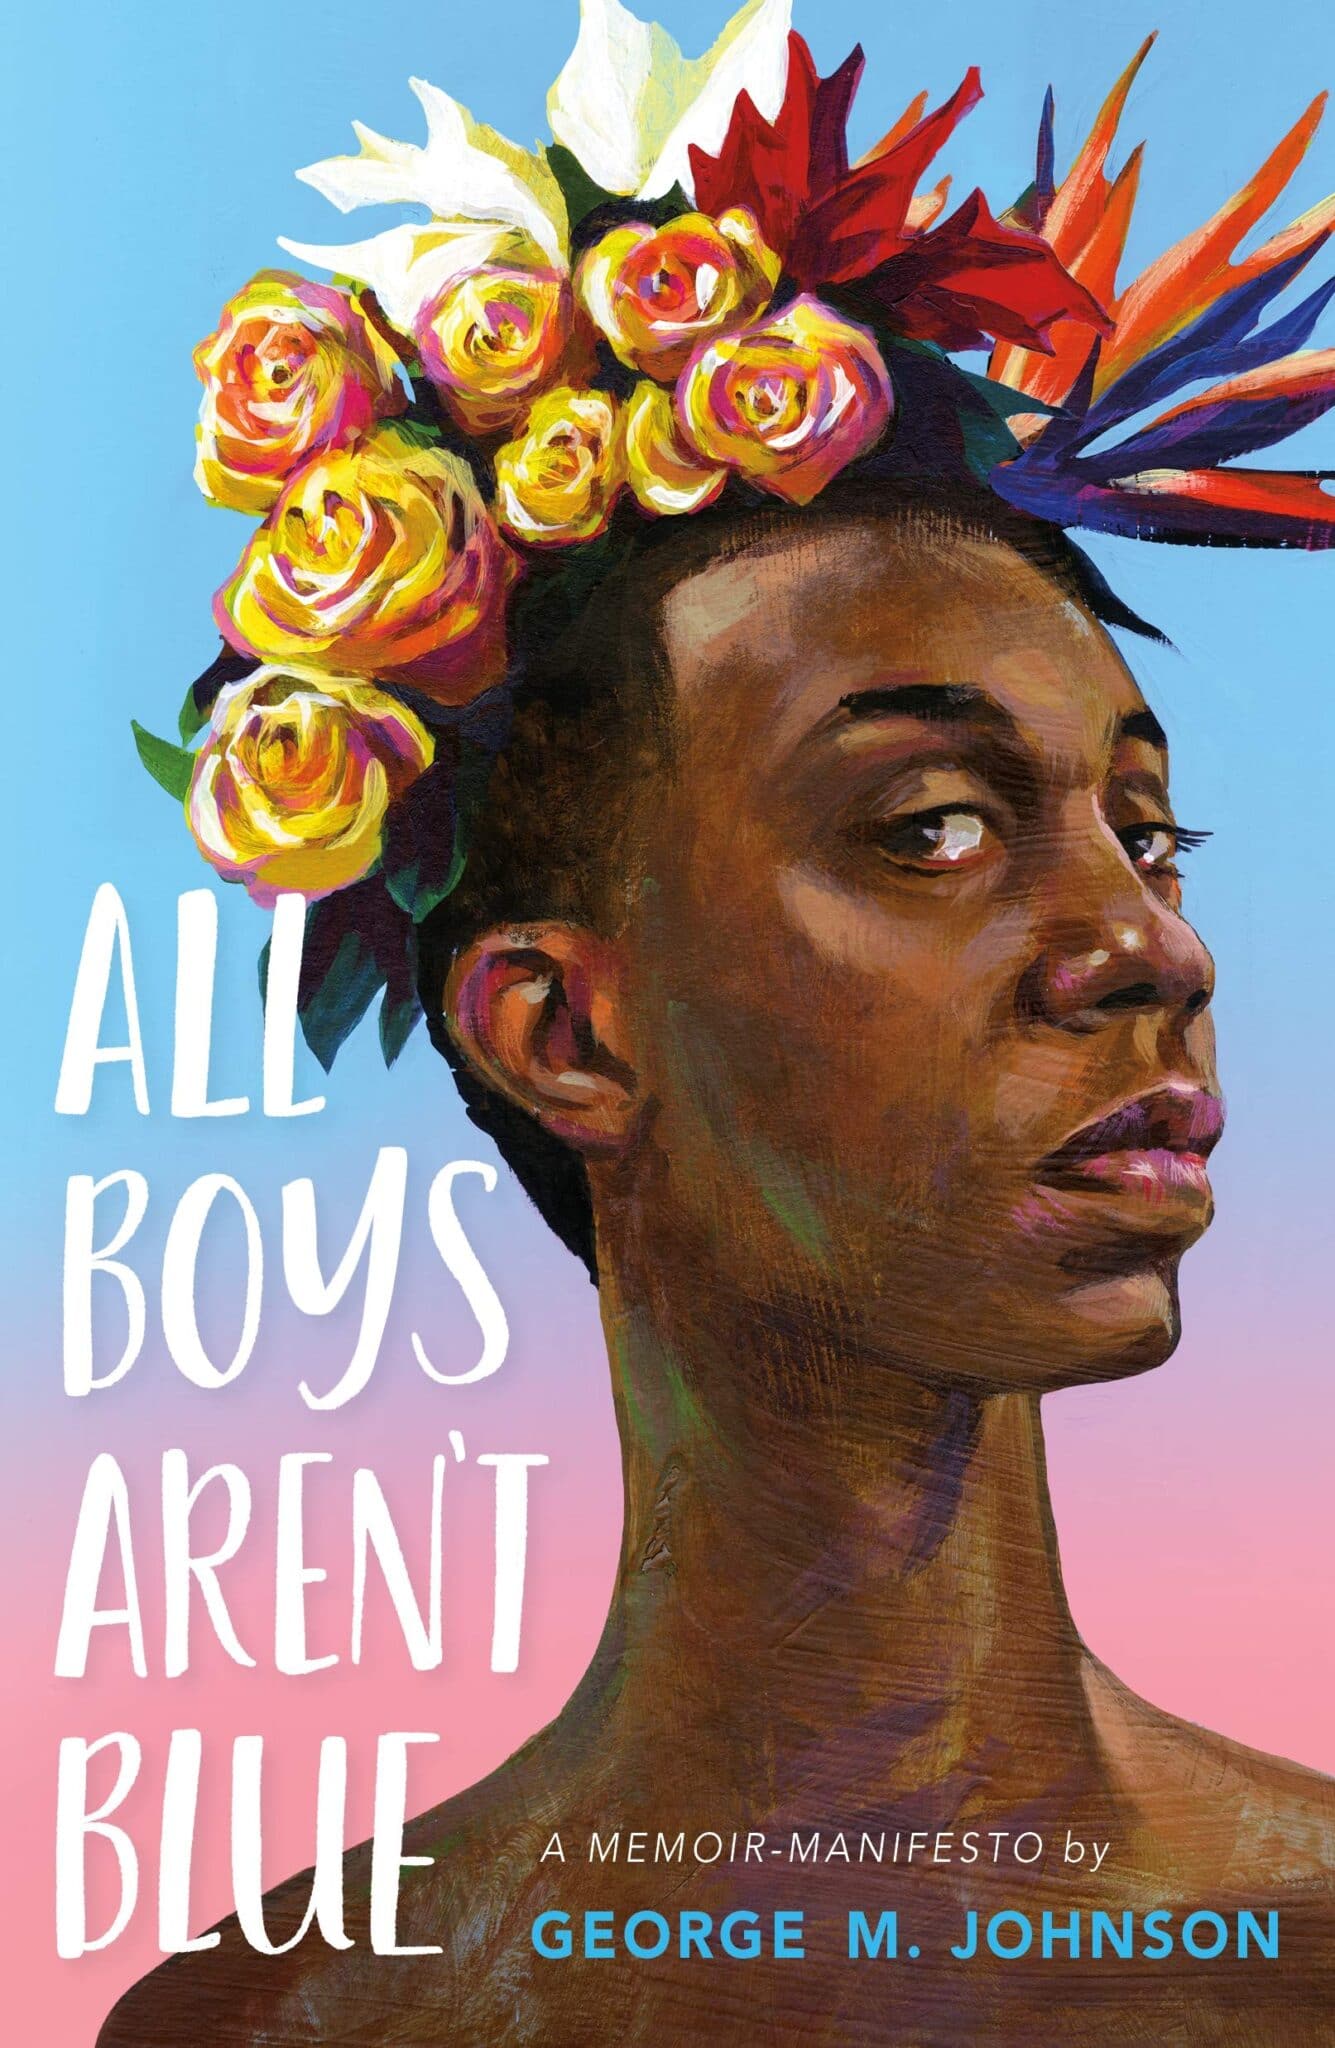 All Boys Aren't Blue by George M Johnson. 